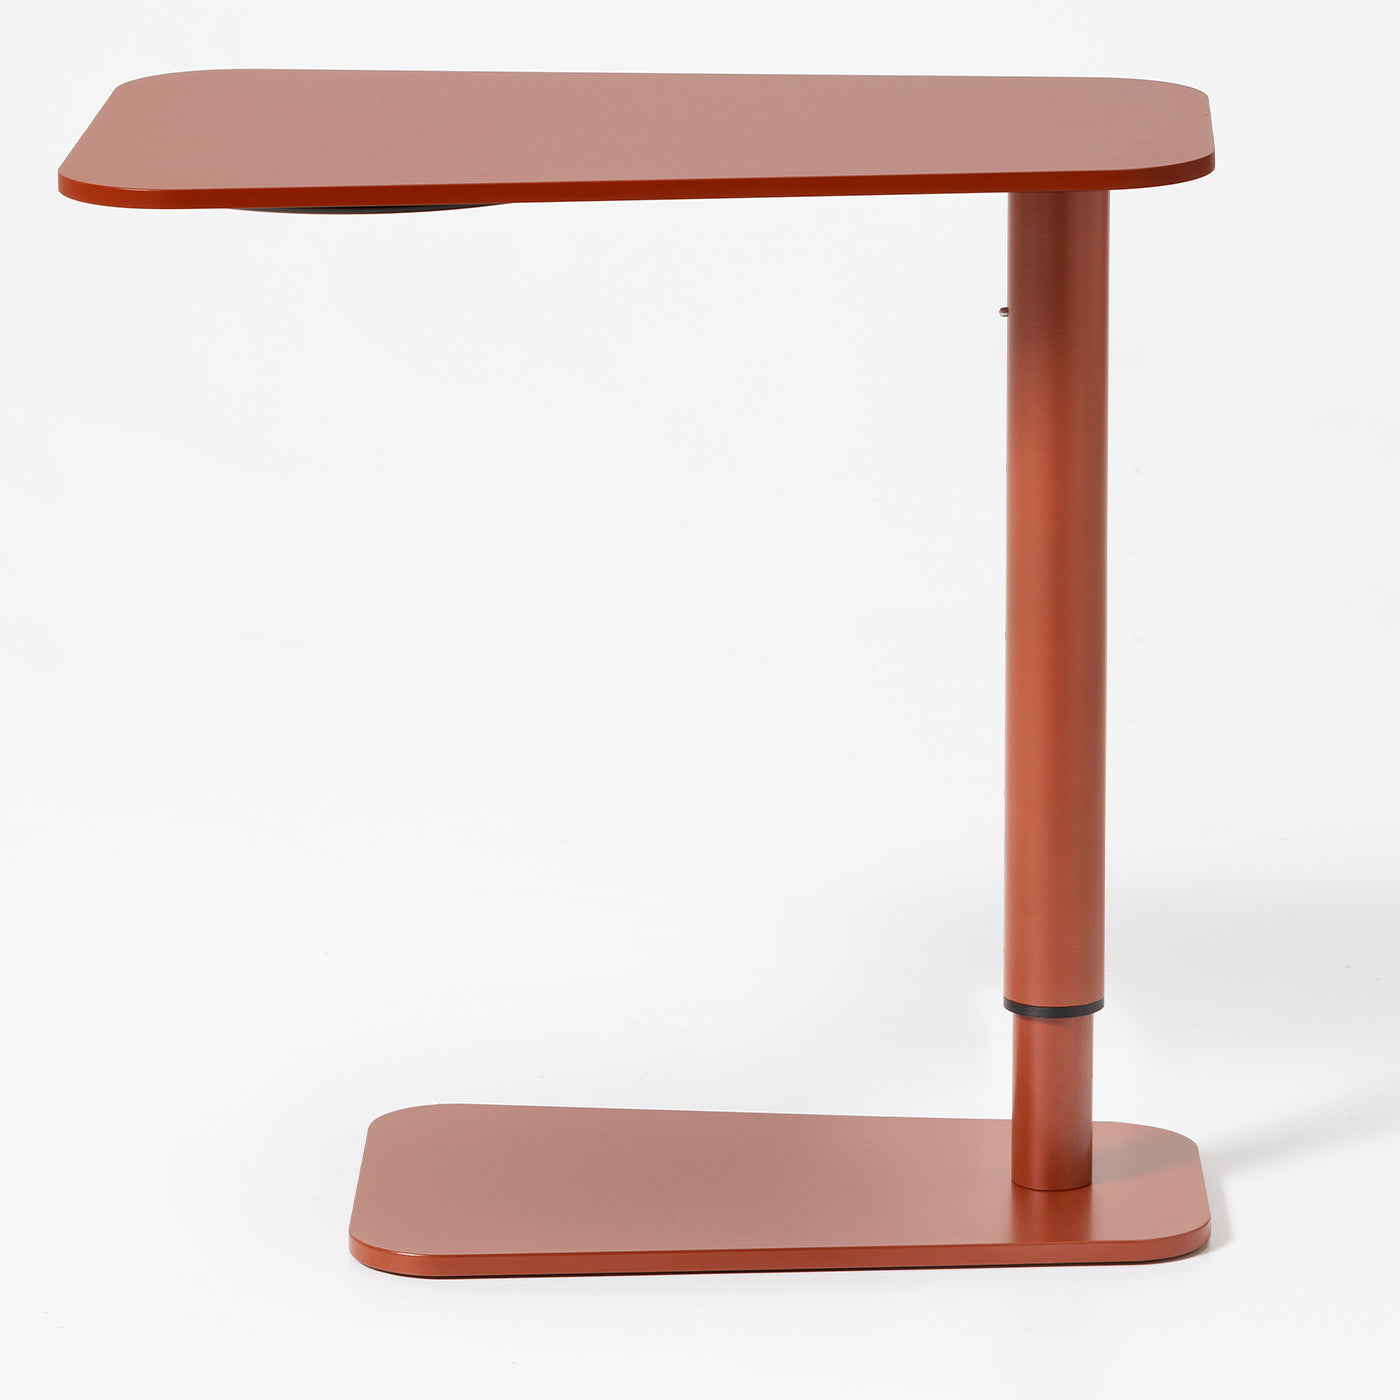 0130 Jens Red Side Table by Massimo Broglio - Alternative view 2